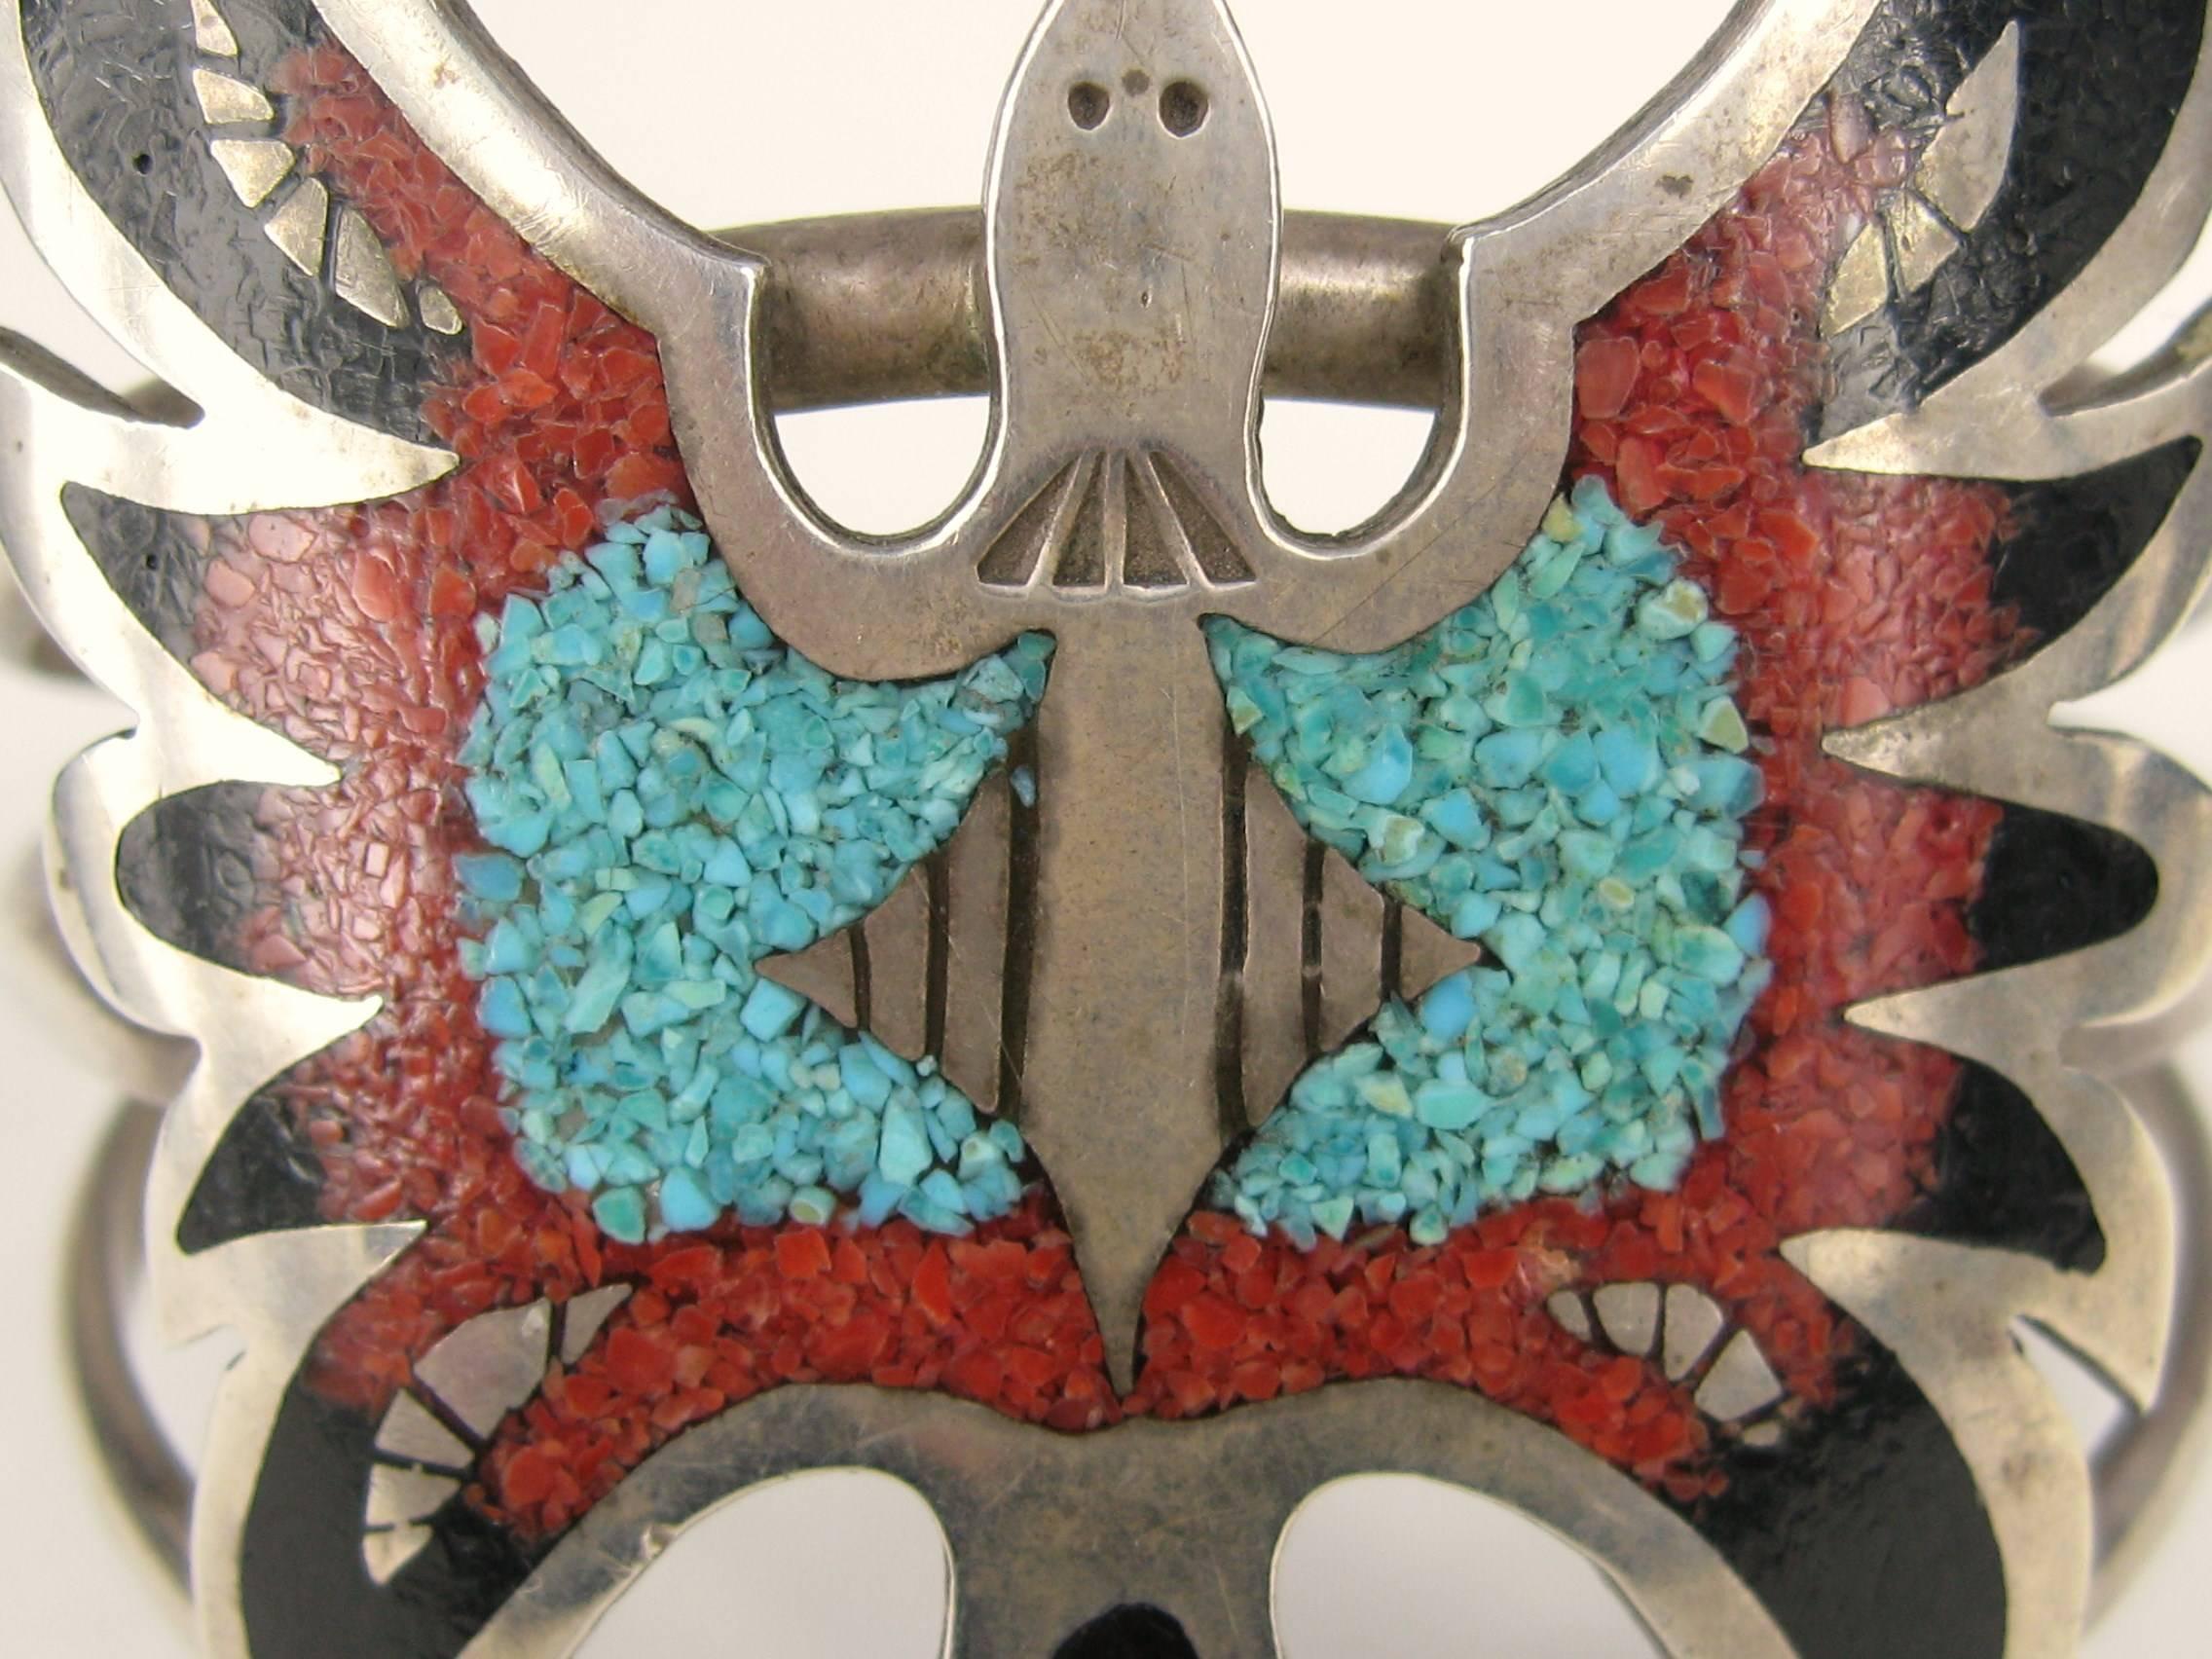 Large Zuni Bird in Flight Turquoise, Coral and Onyx Bracelet with a 3 ring bracelet. Stunning workmanship on this native American Bracelet. Measures 3.00 in x 2.00 in - 1.08in opening on cuff and it Will Fit a 7 in to 8 in  wrist. This is out of a